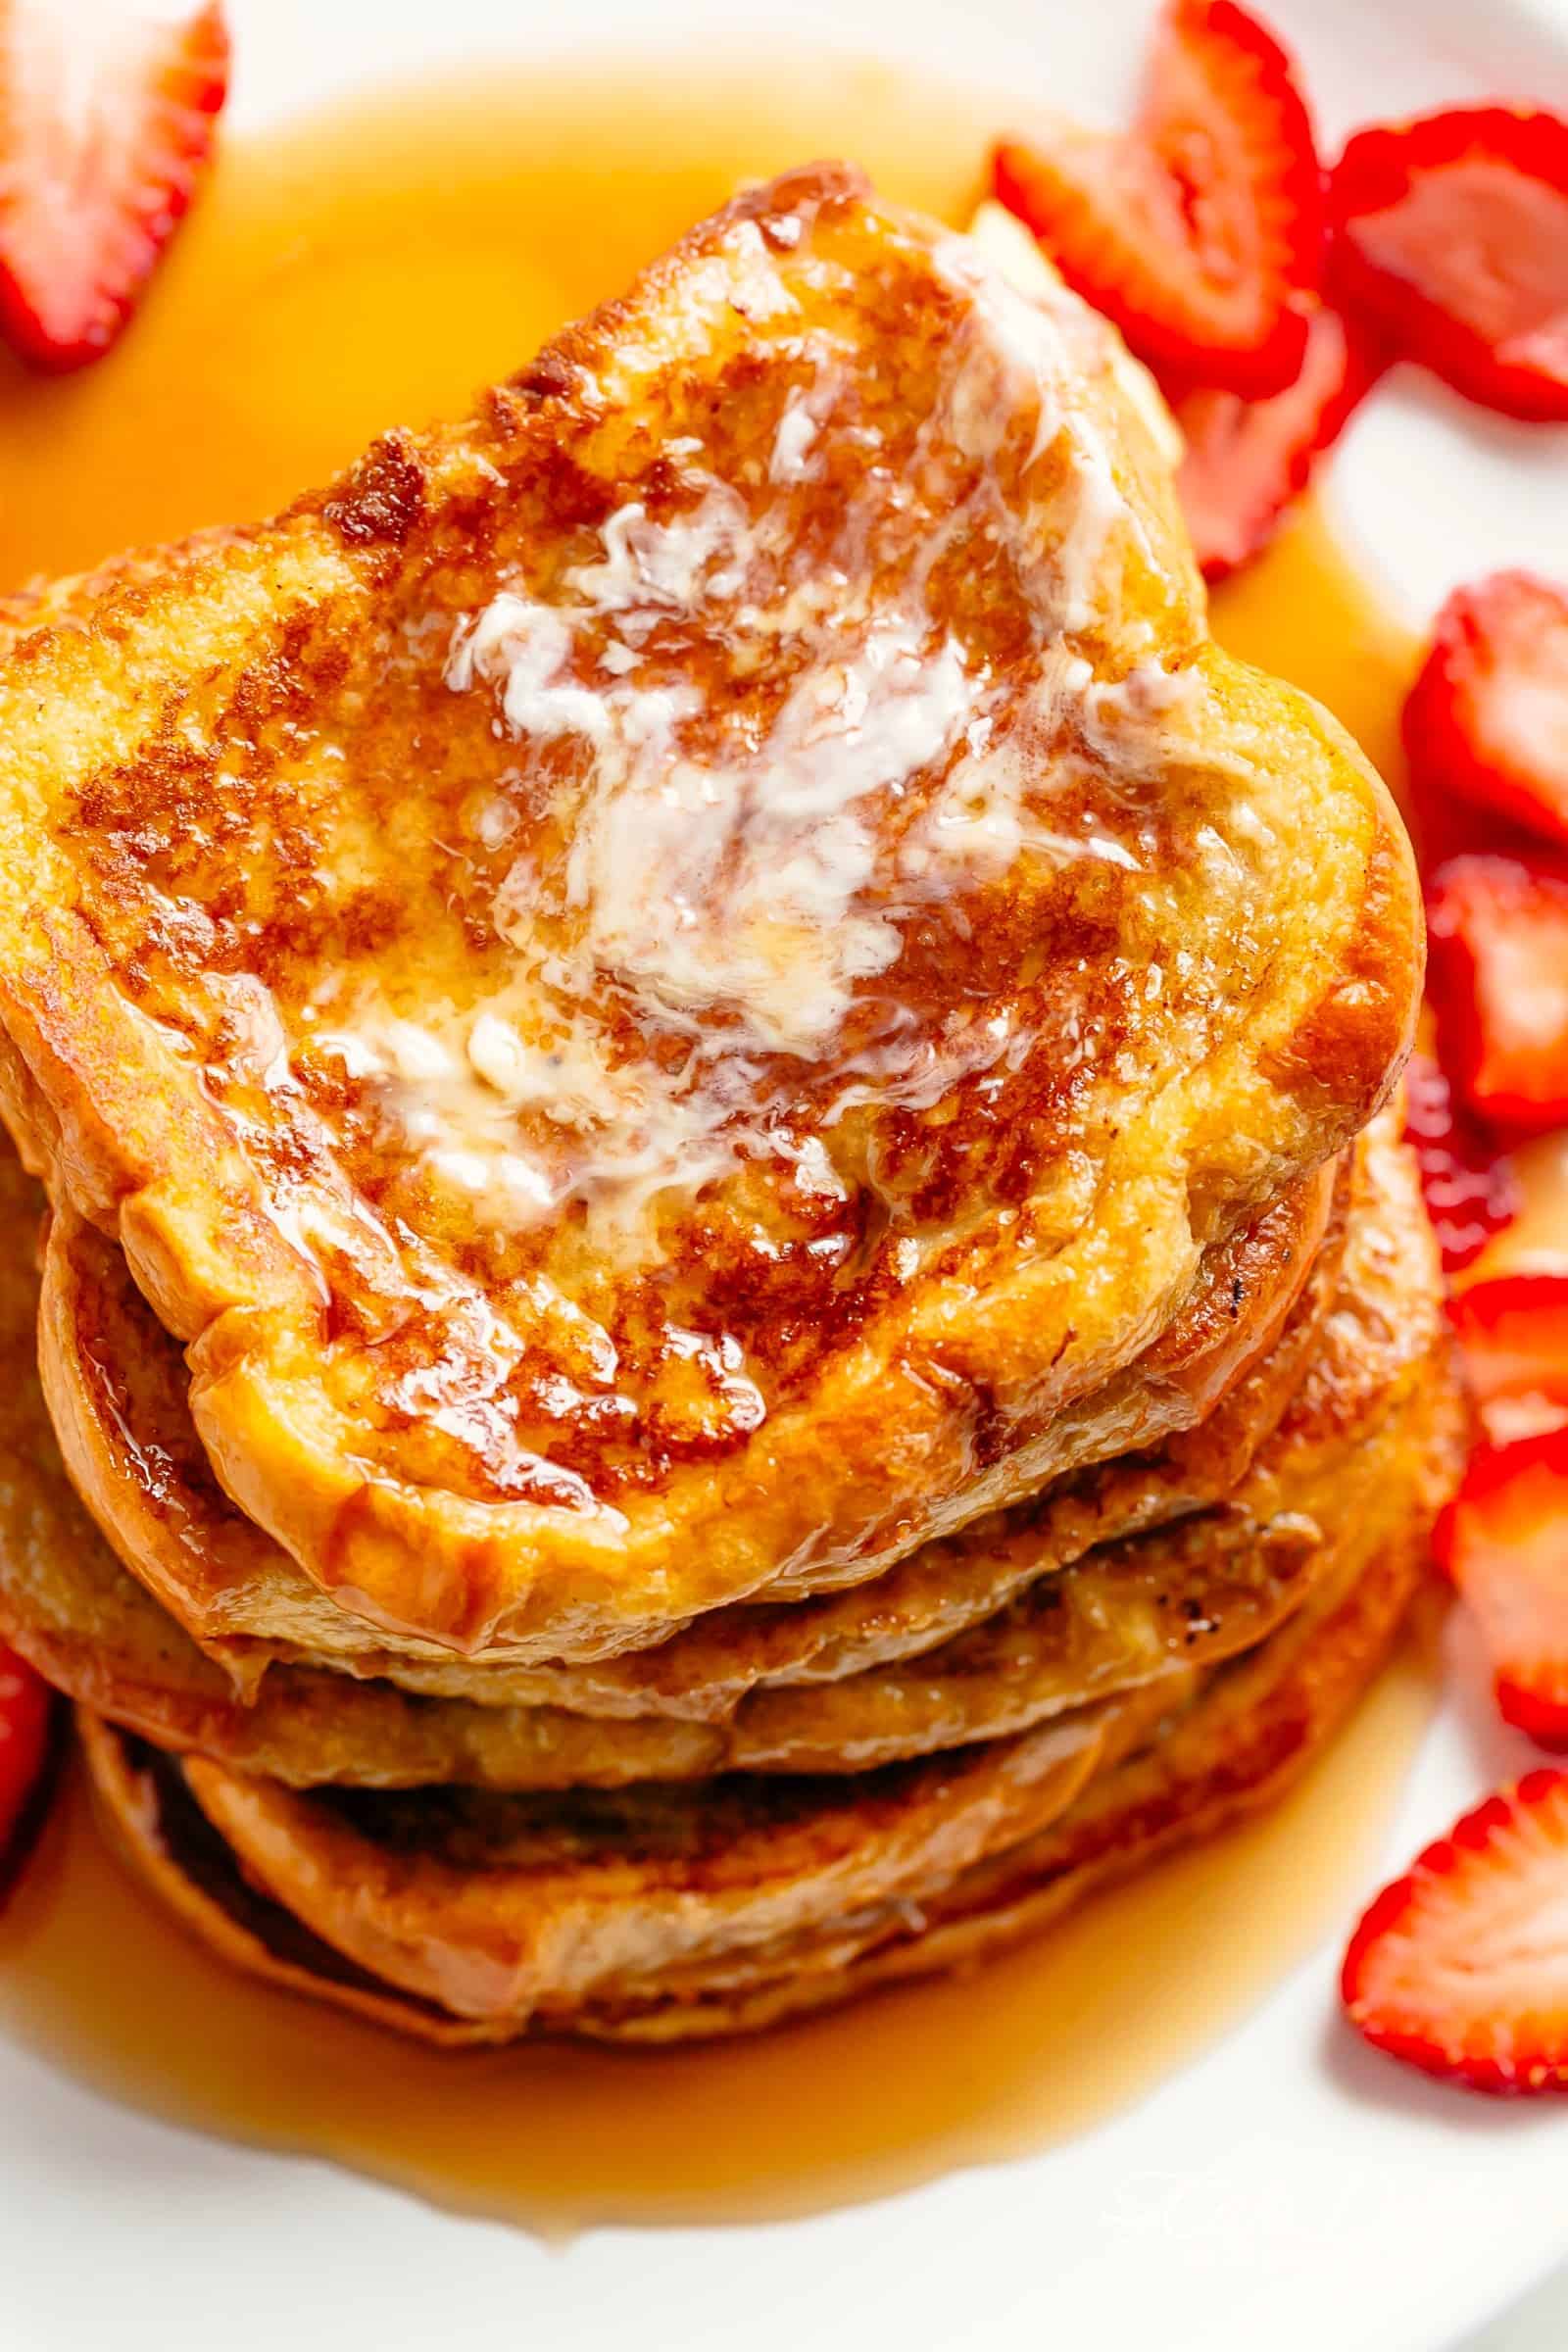 The Best French Toast is super easy to make with the perfect balance of flavours soaked into brioche slices! With a hint of vanilla and cinnamon, a touch of sweetness, and crispy pan fried edges, this is one French Toast recipe the whole family goes crazy for | cafedelites.com